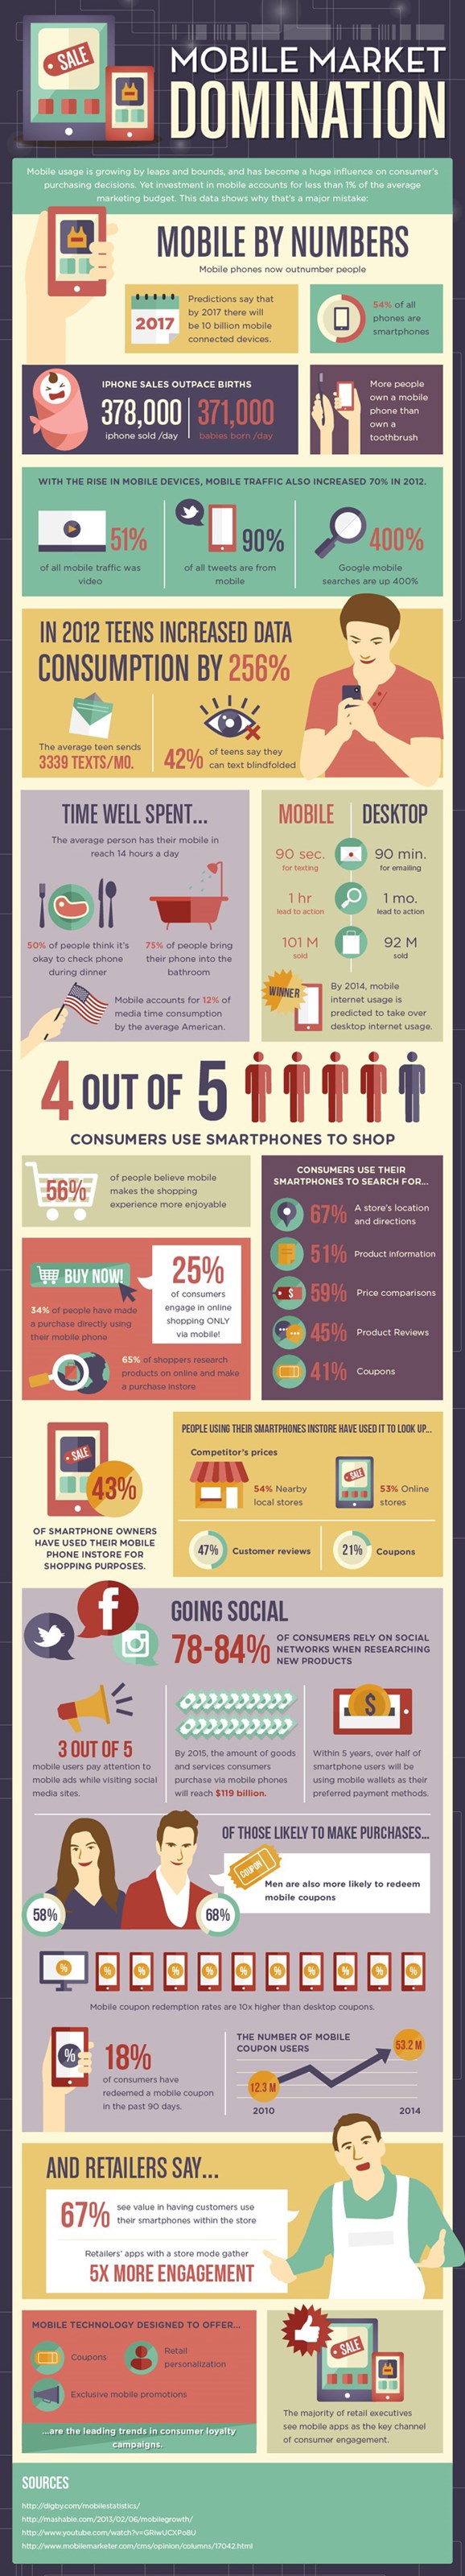 Mobile marketing infographic